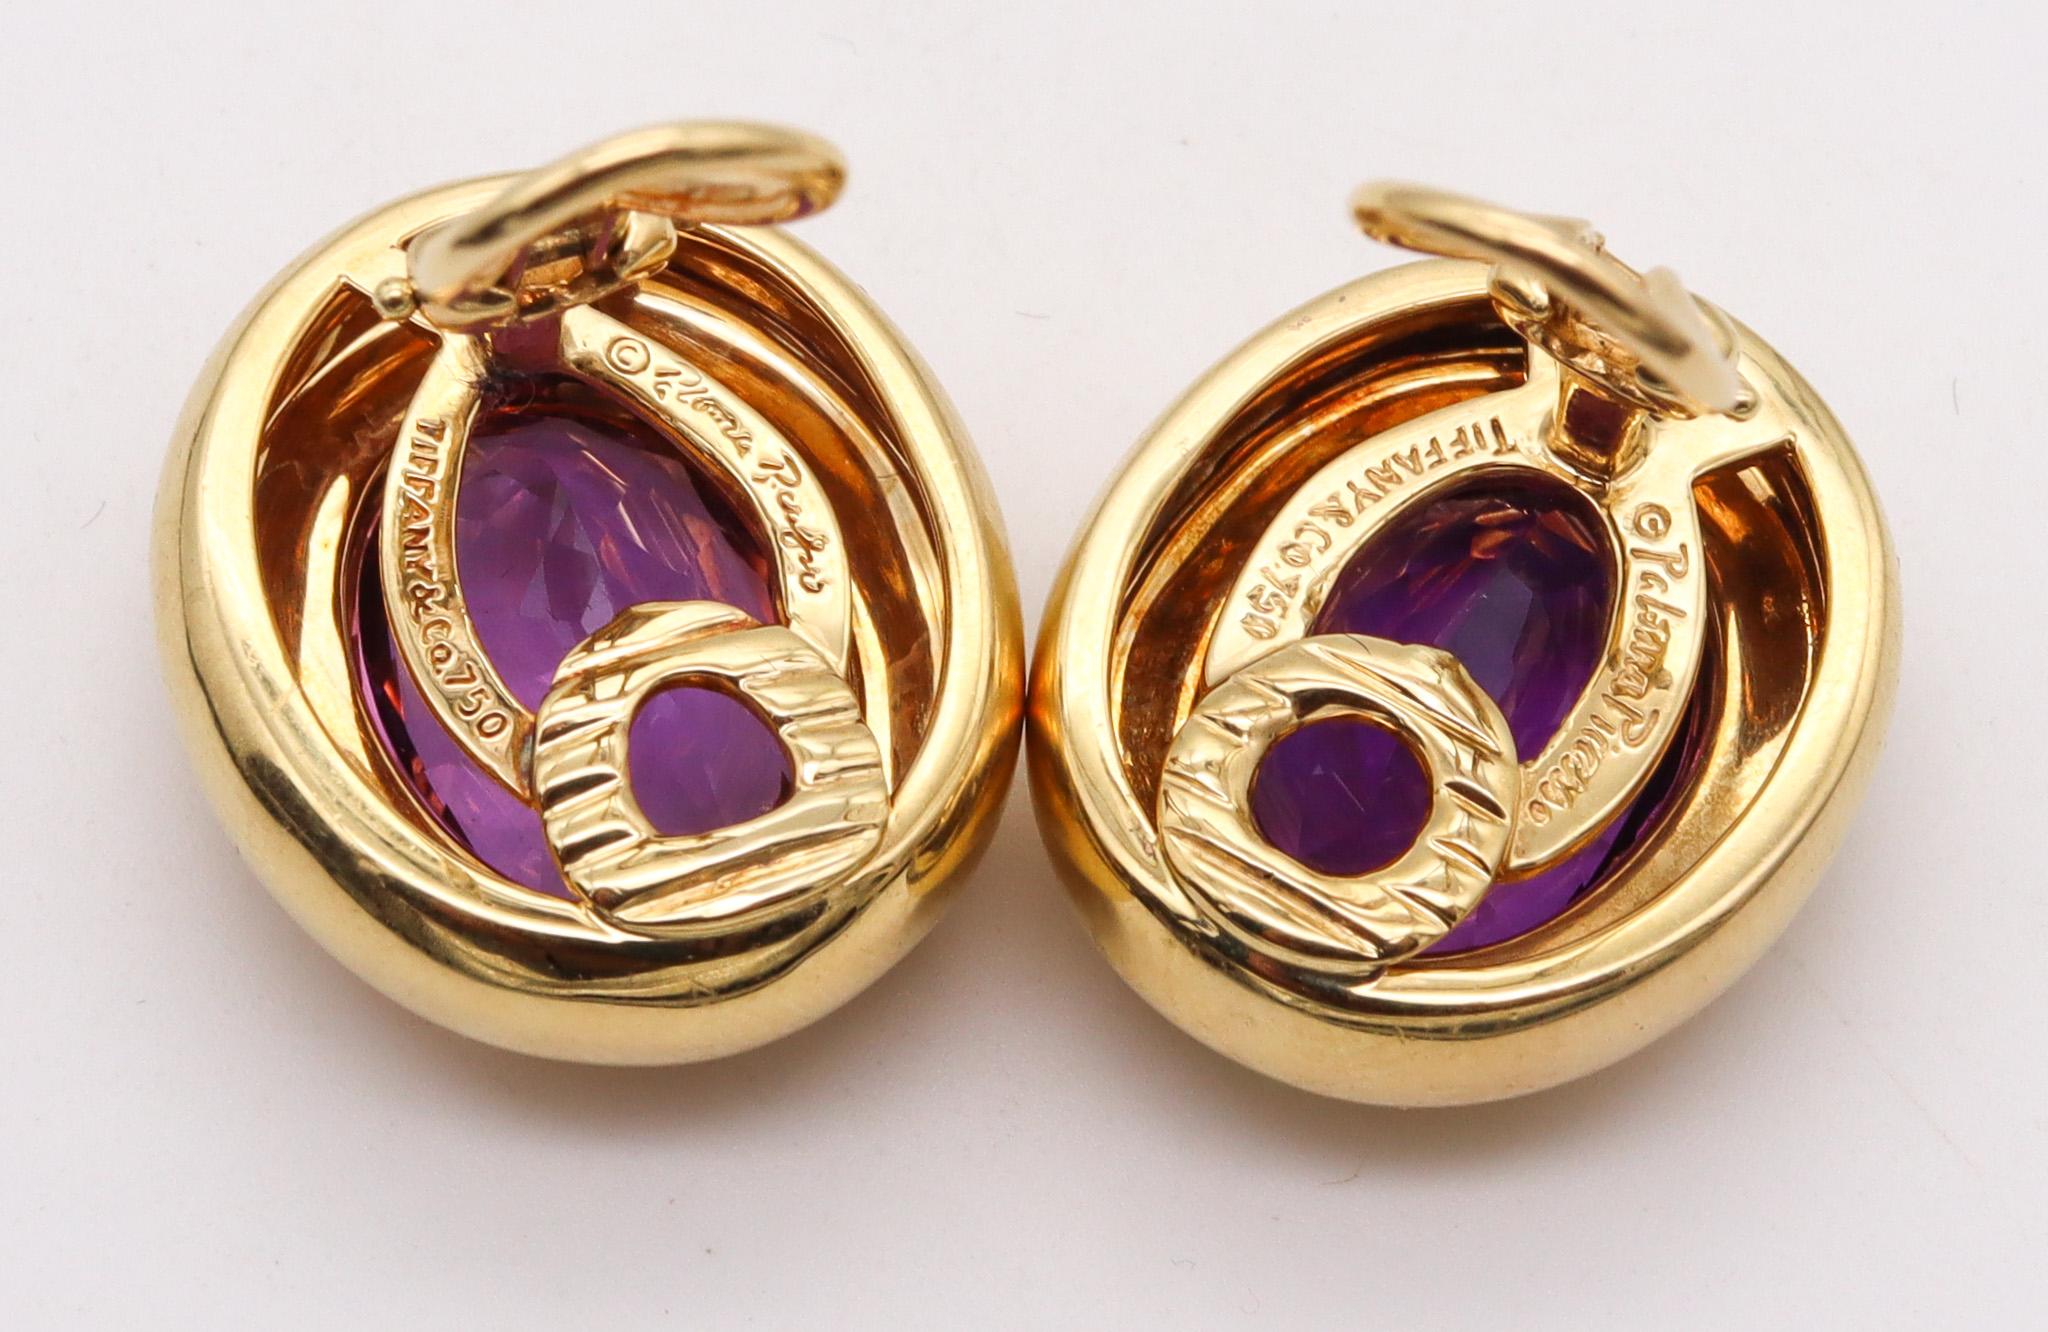 Tiffany & Co. 1987 Paloma Picasso Clips Earrings 18k Yellow Gold with Amethysts In Excellent Condition For Sale In Miami, FL